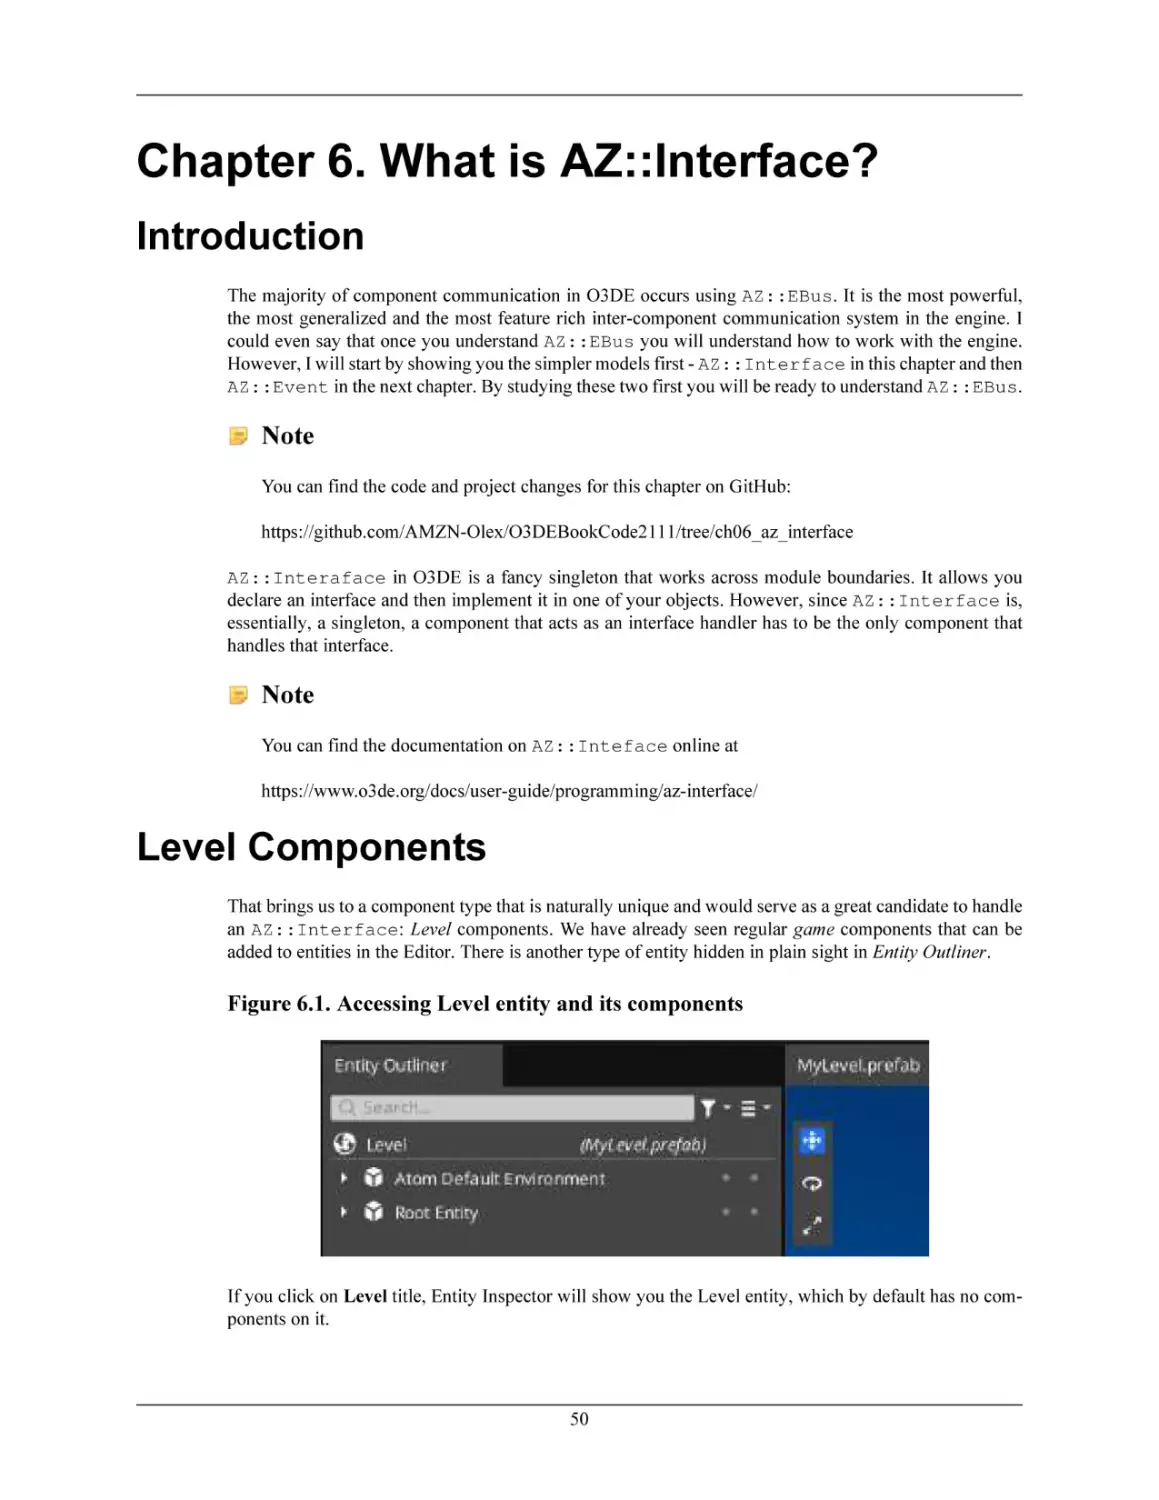 Chapter 6. What is AZ
Introduction
Level Components